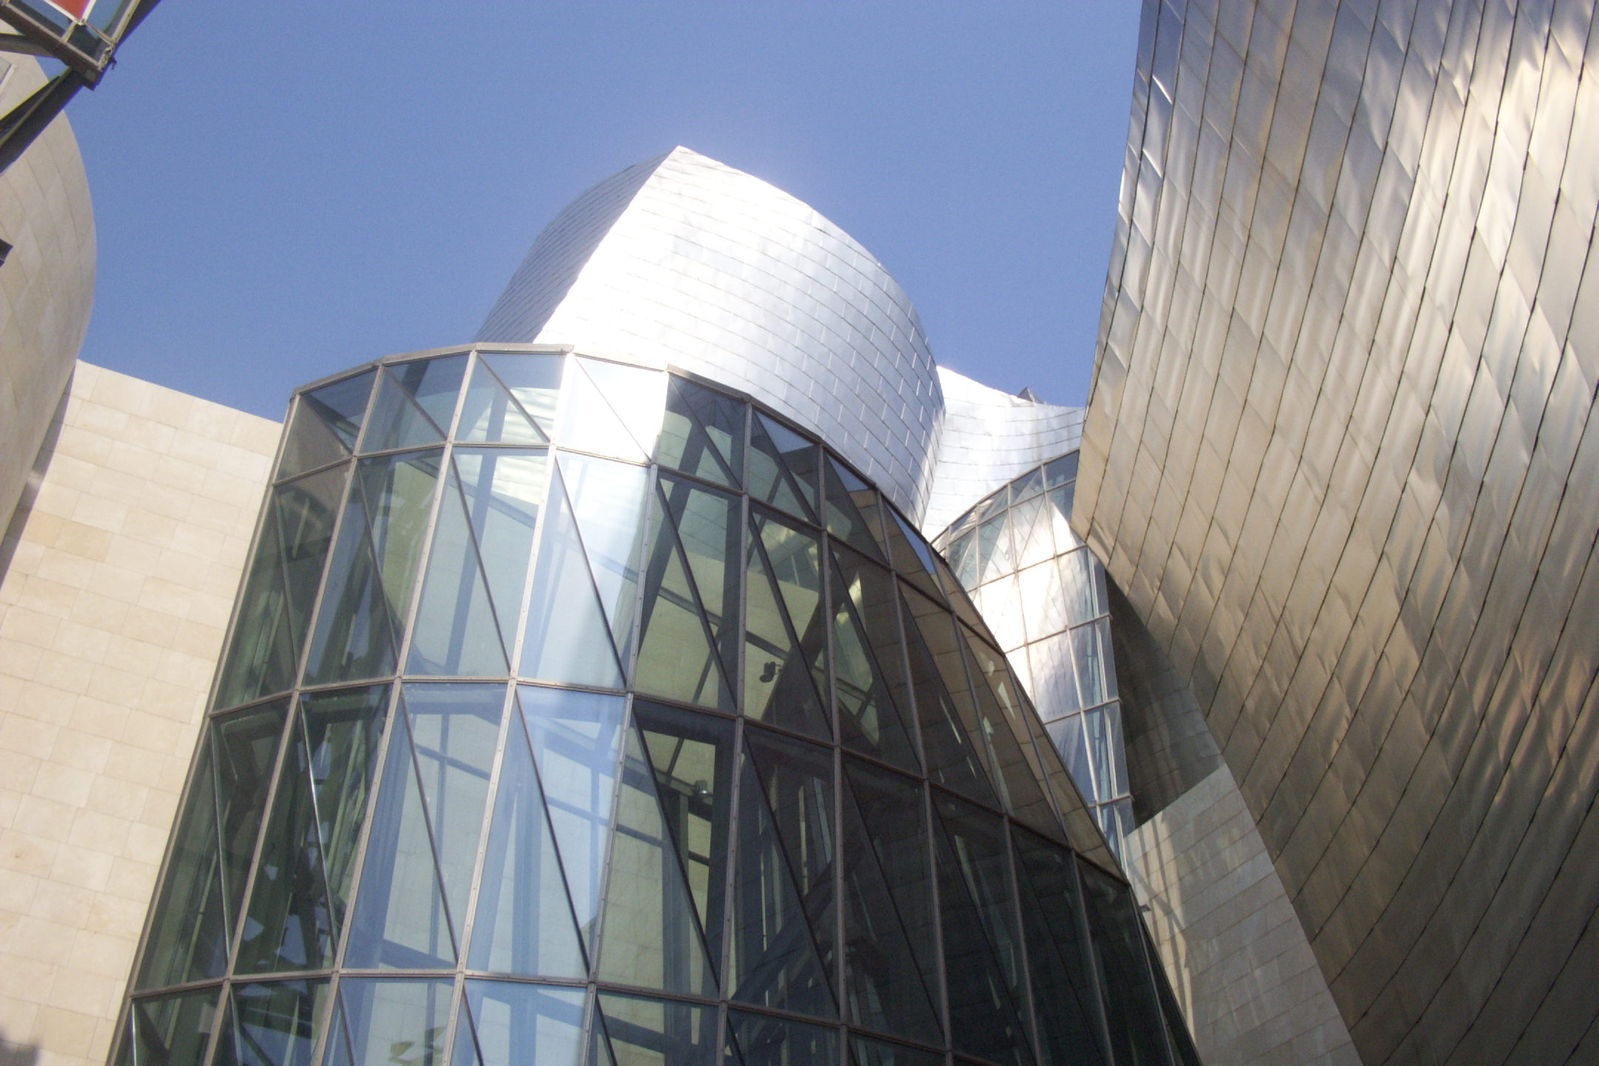 curved glass and steel building against the blue sky